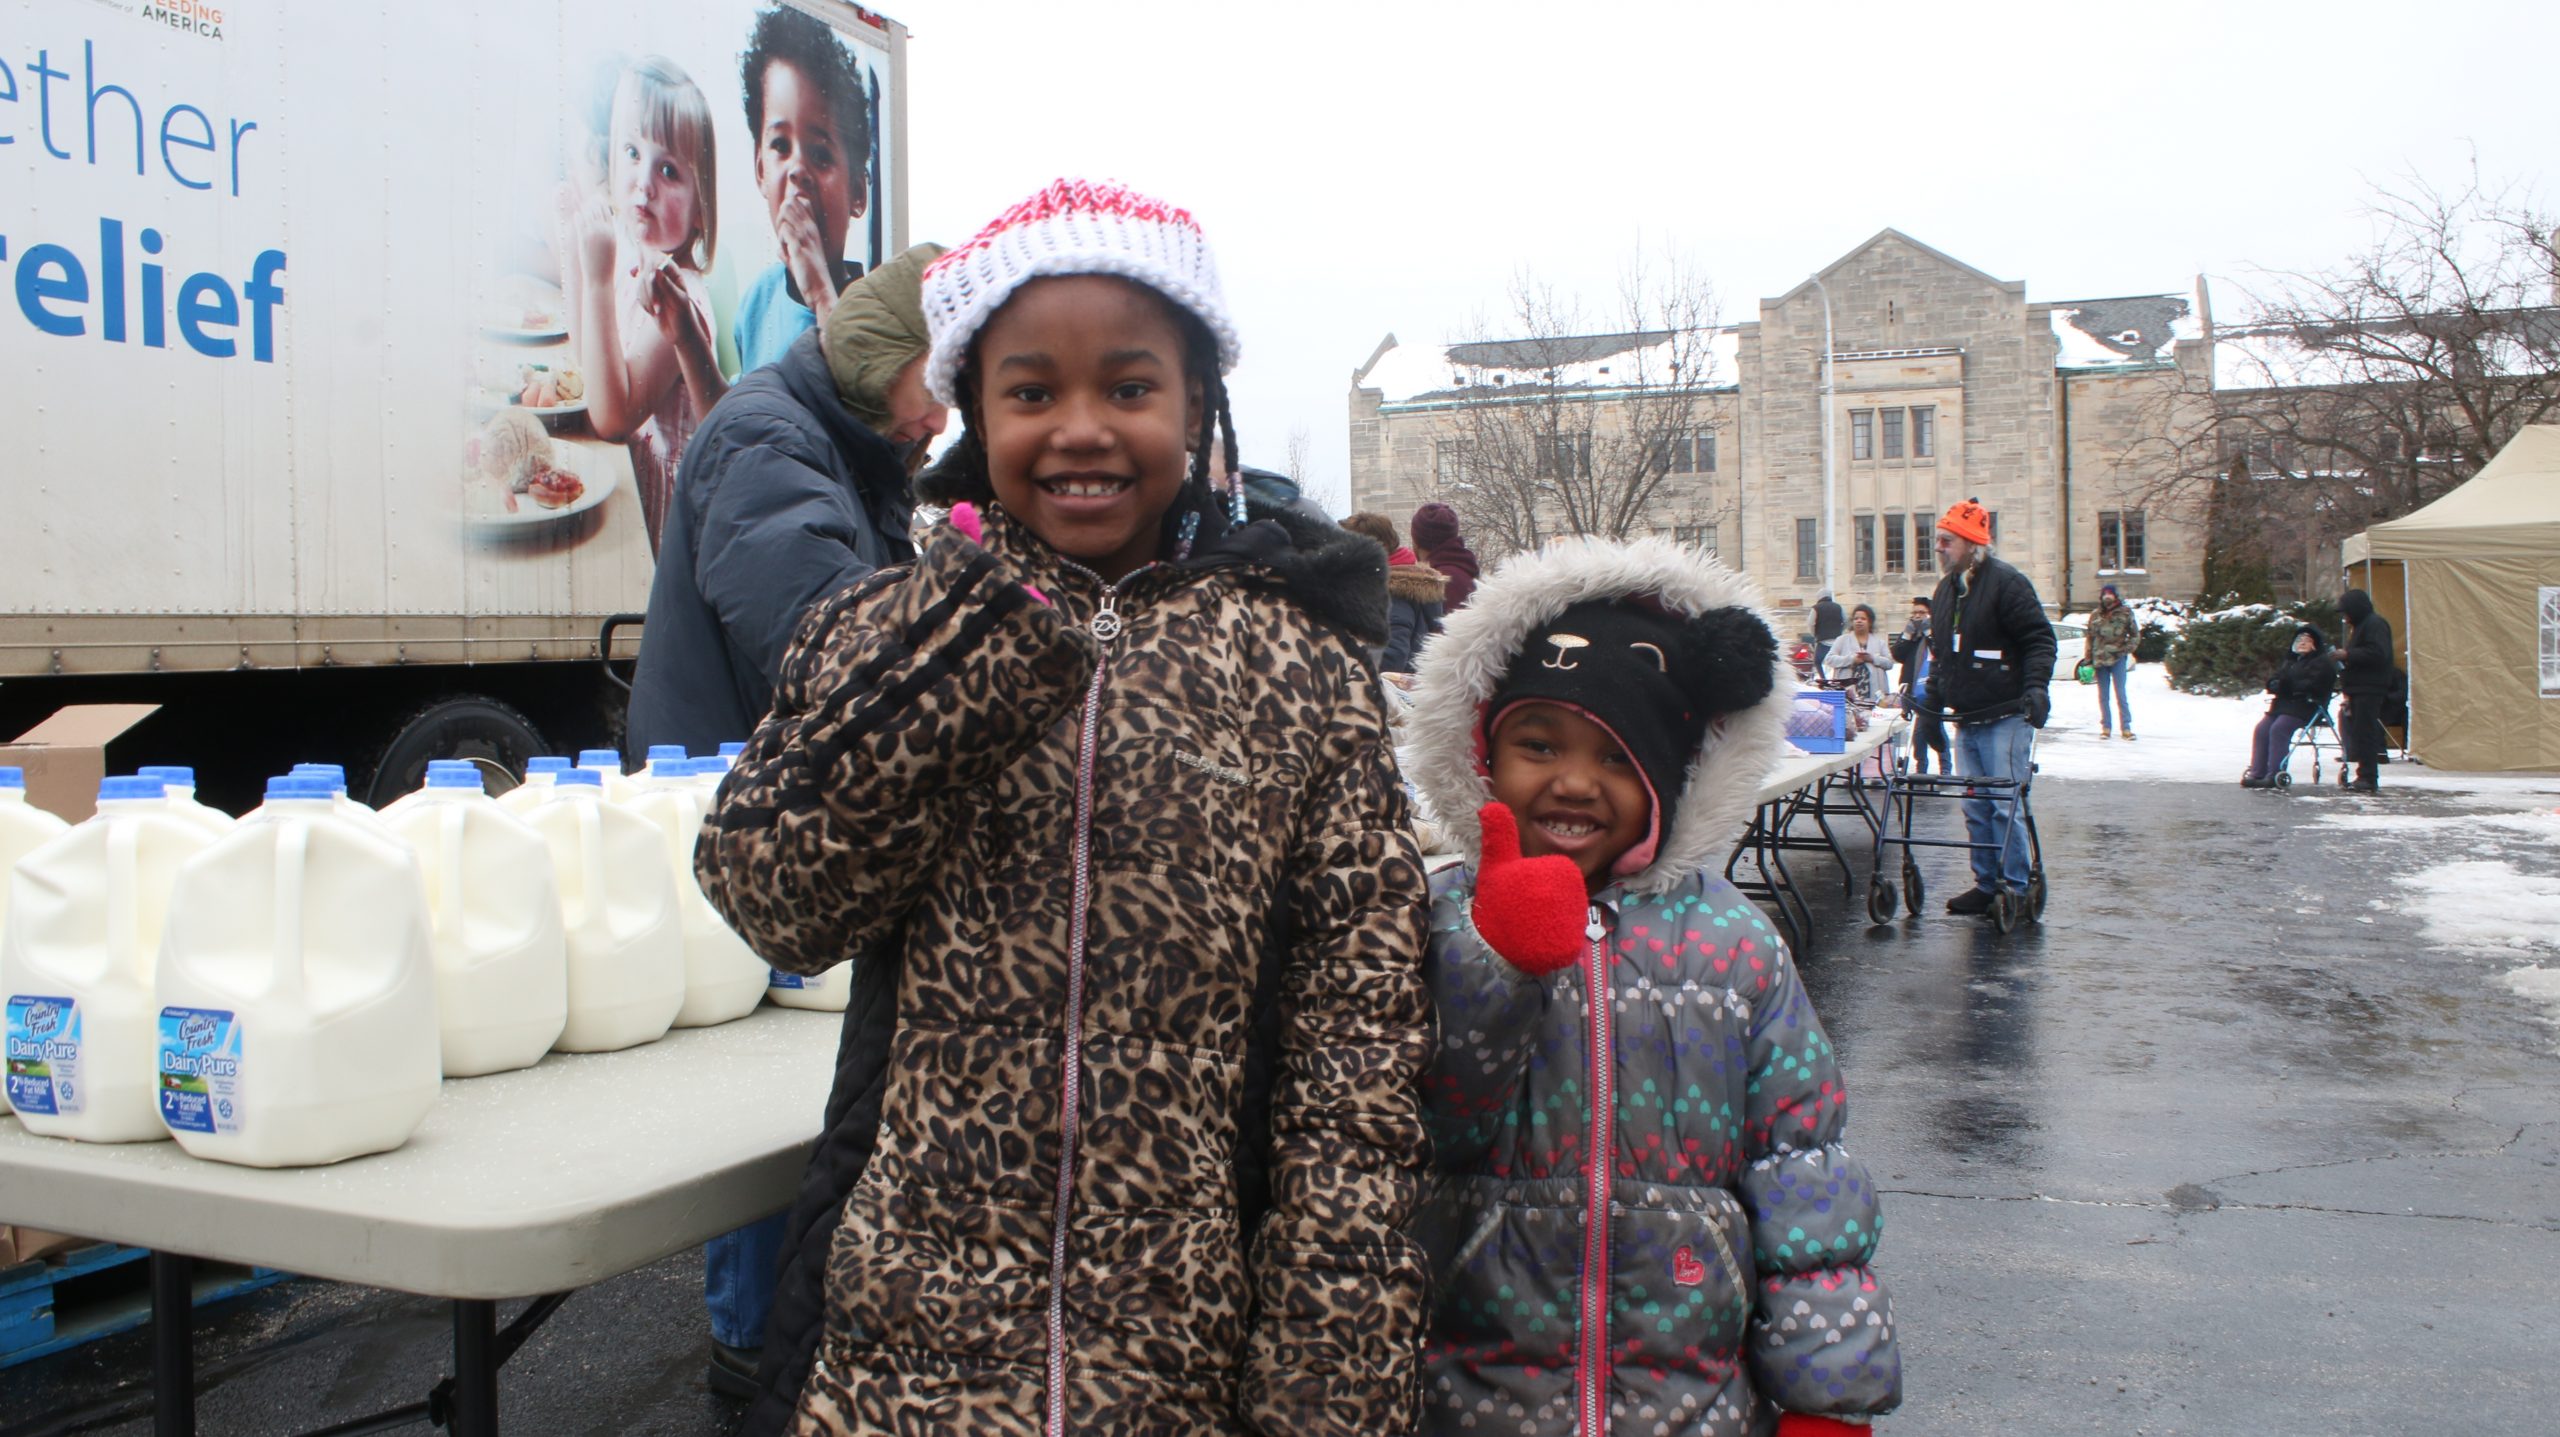 Two little girls smile at the camera while waiting at the Mobile Pantry